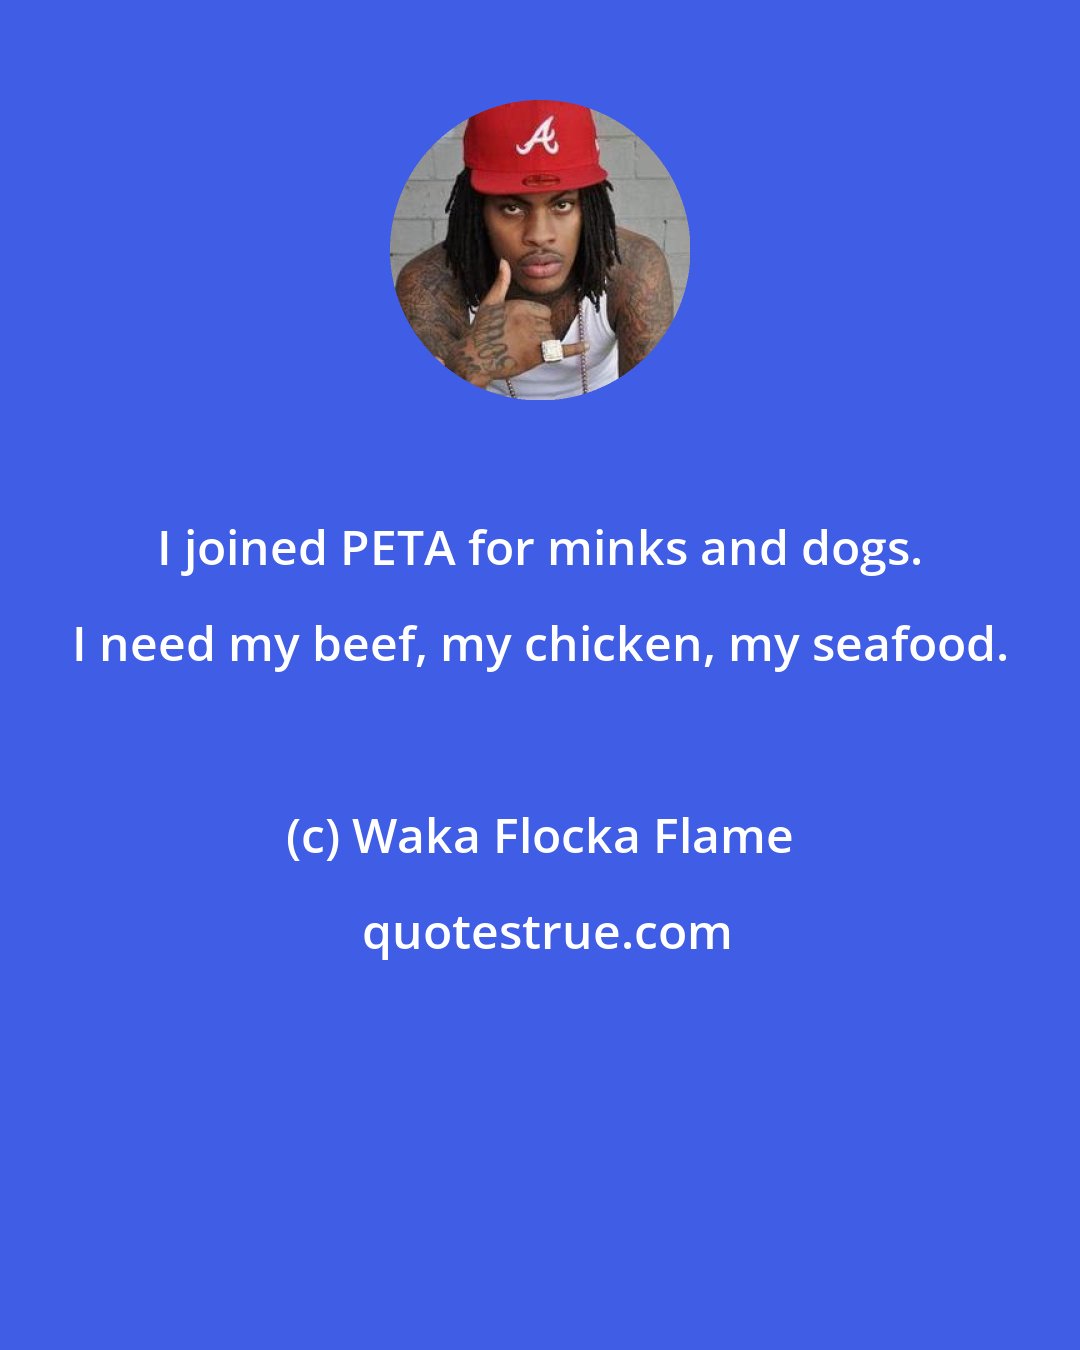 Waka Flocka Flame: I joined PETA for minks and dogs. I need my beef, my chicken, my seafood.